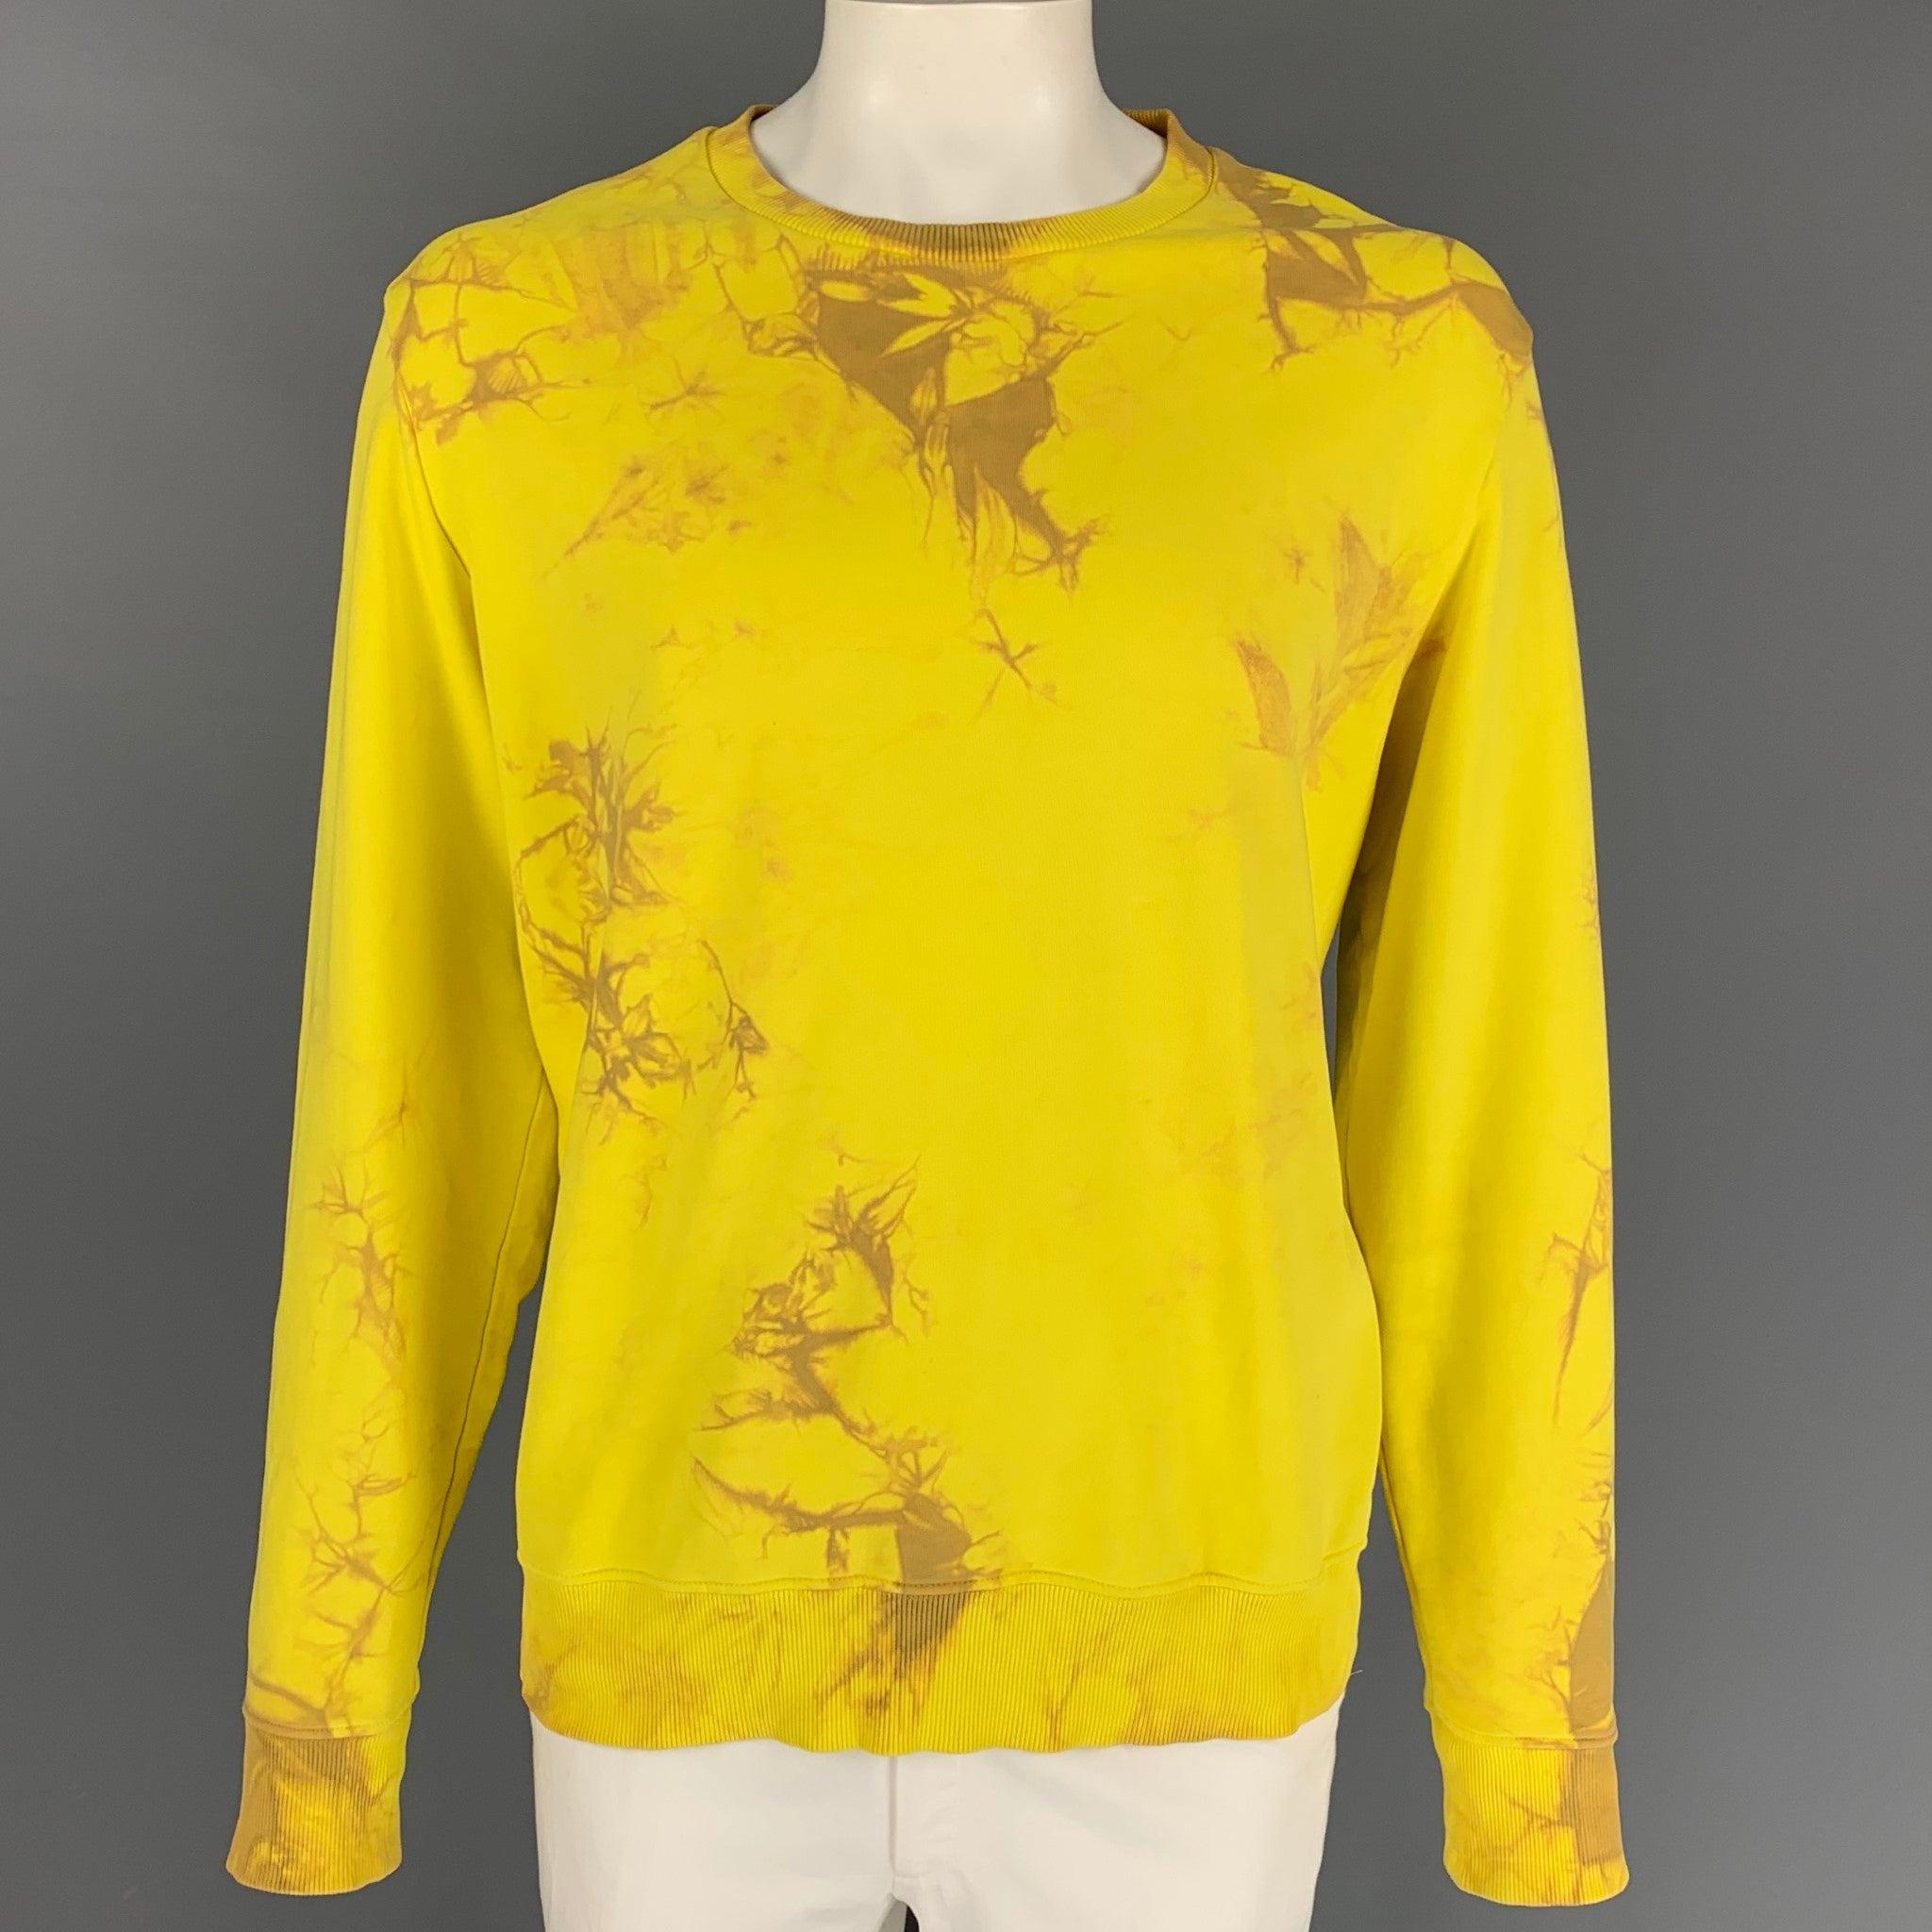 HELMUT LANG sweatshirt comes in a yellow & brown tie dye cotton featuring a back logo design, ribbed hem, and a crew-neck. Made in Portugal.
Very Good
Pre-Owned Condition. 

Marked:   XXL 

Measurements: 
 
Shoulder:
20 inches  Chest: 50 inches 